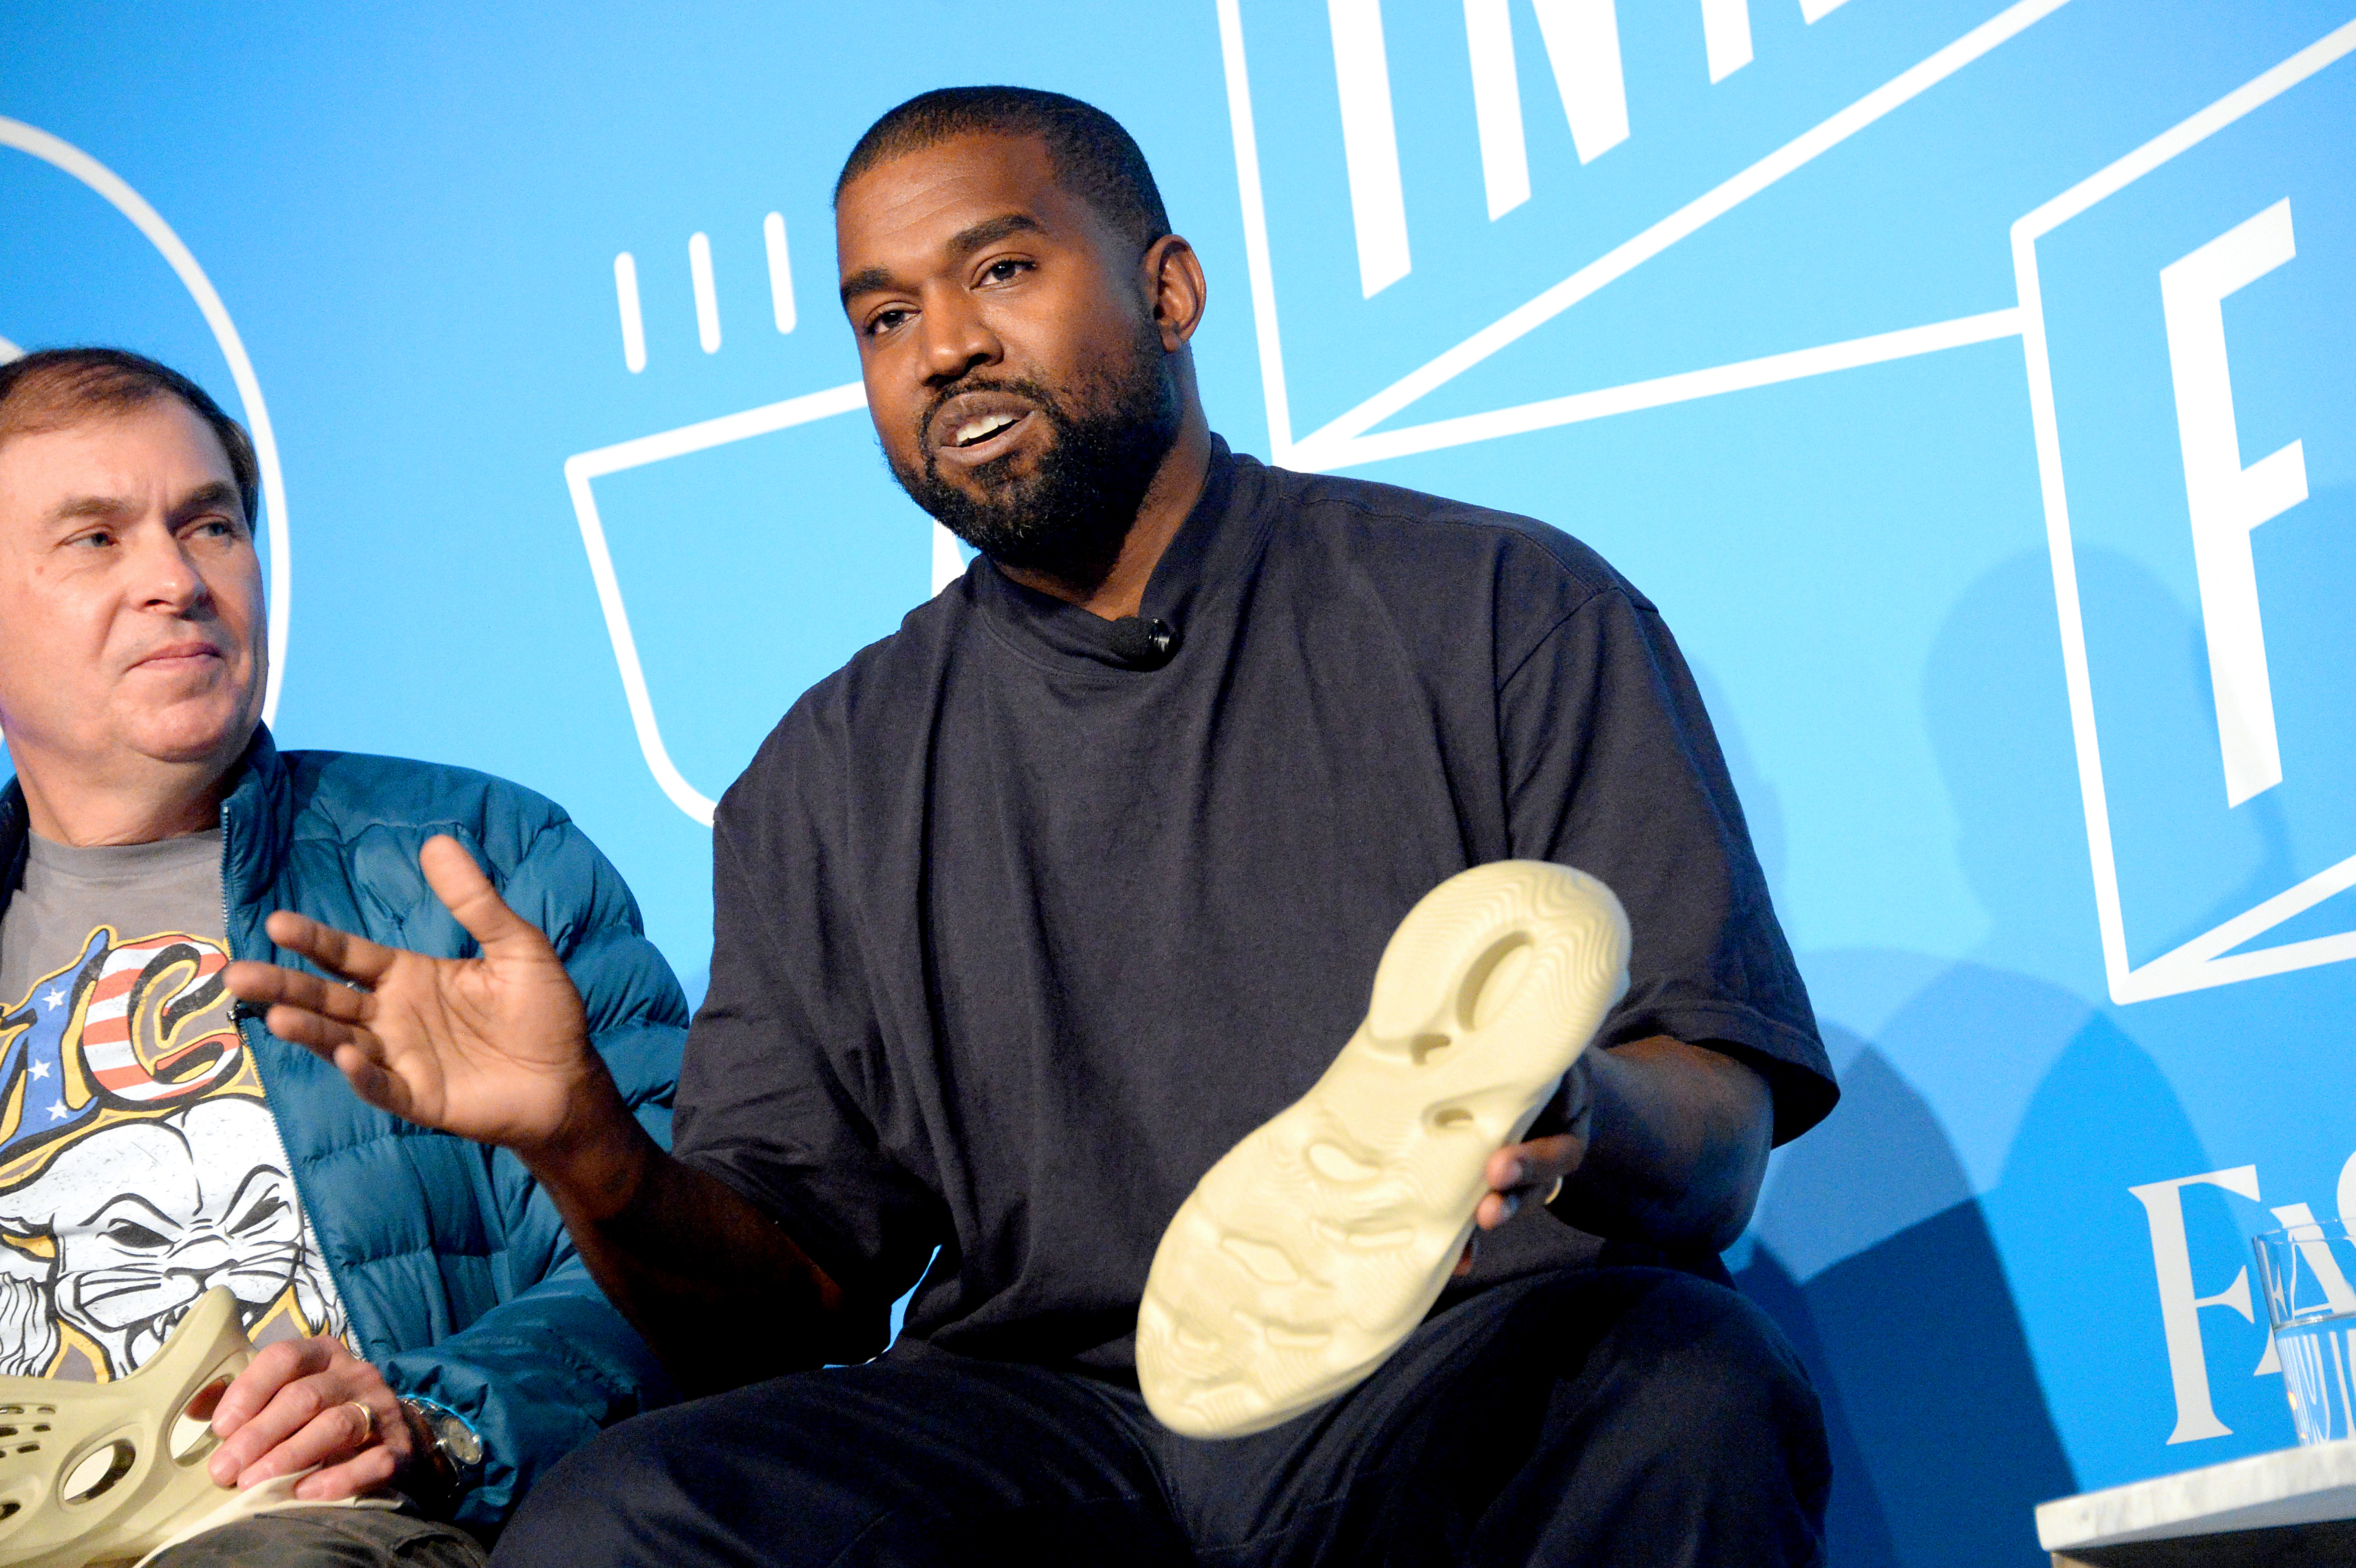 The YEEZY Foam Runner Surfaces in Brand-New Blue Hue